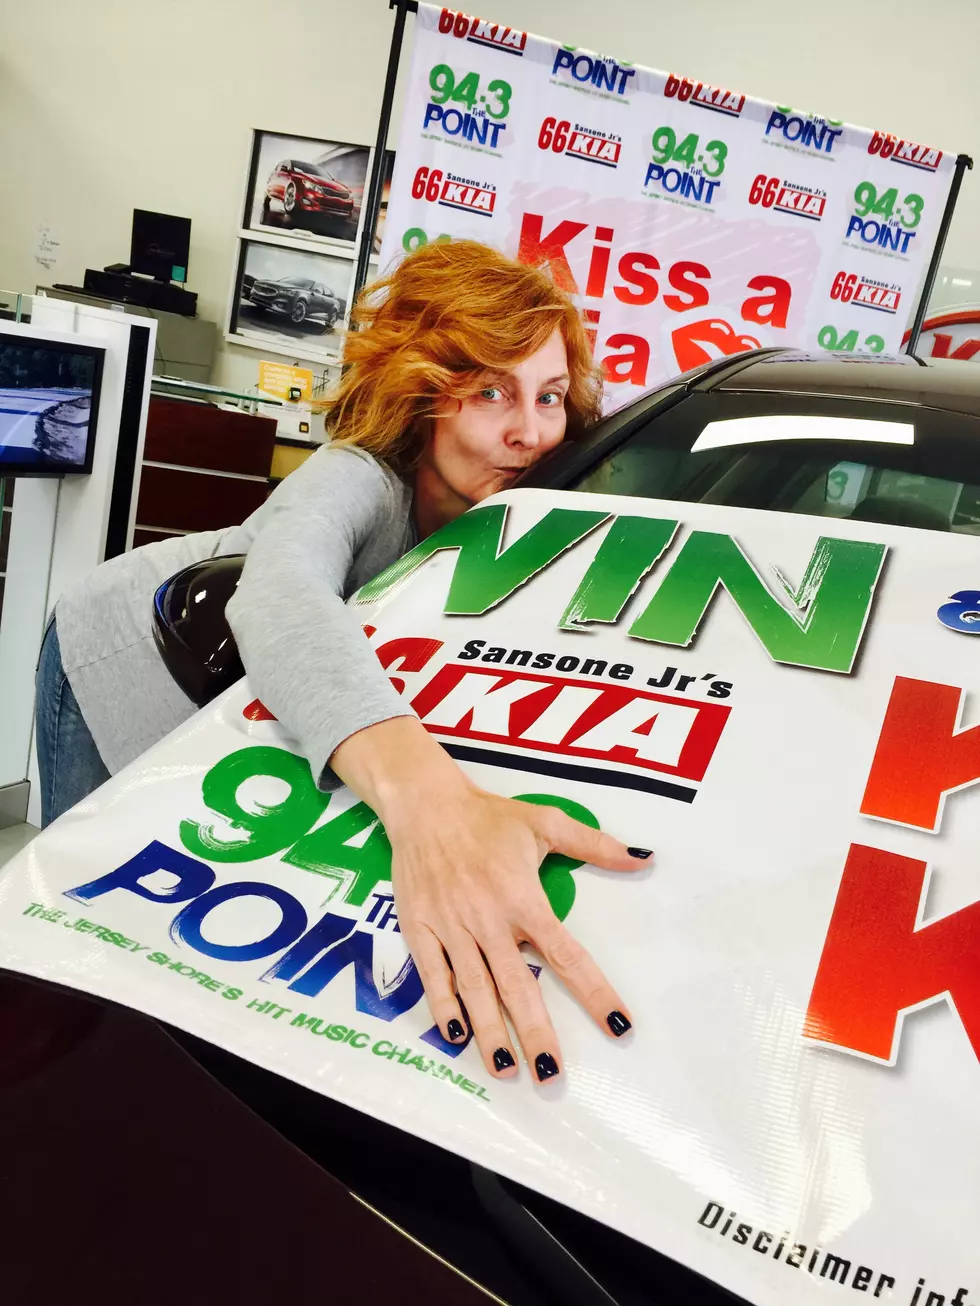 Time Is Running Out: Kiss A Kia And Win A 2017 Kia Optima on Labor Day